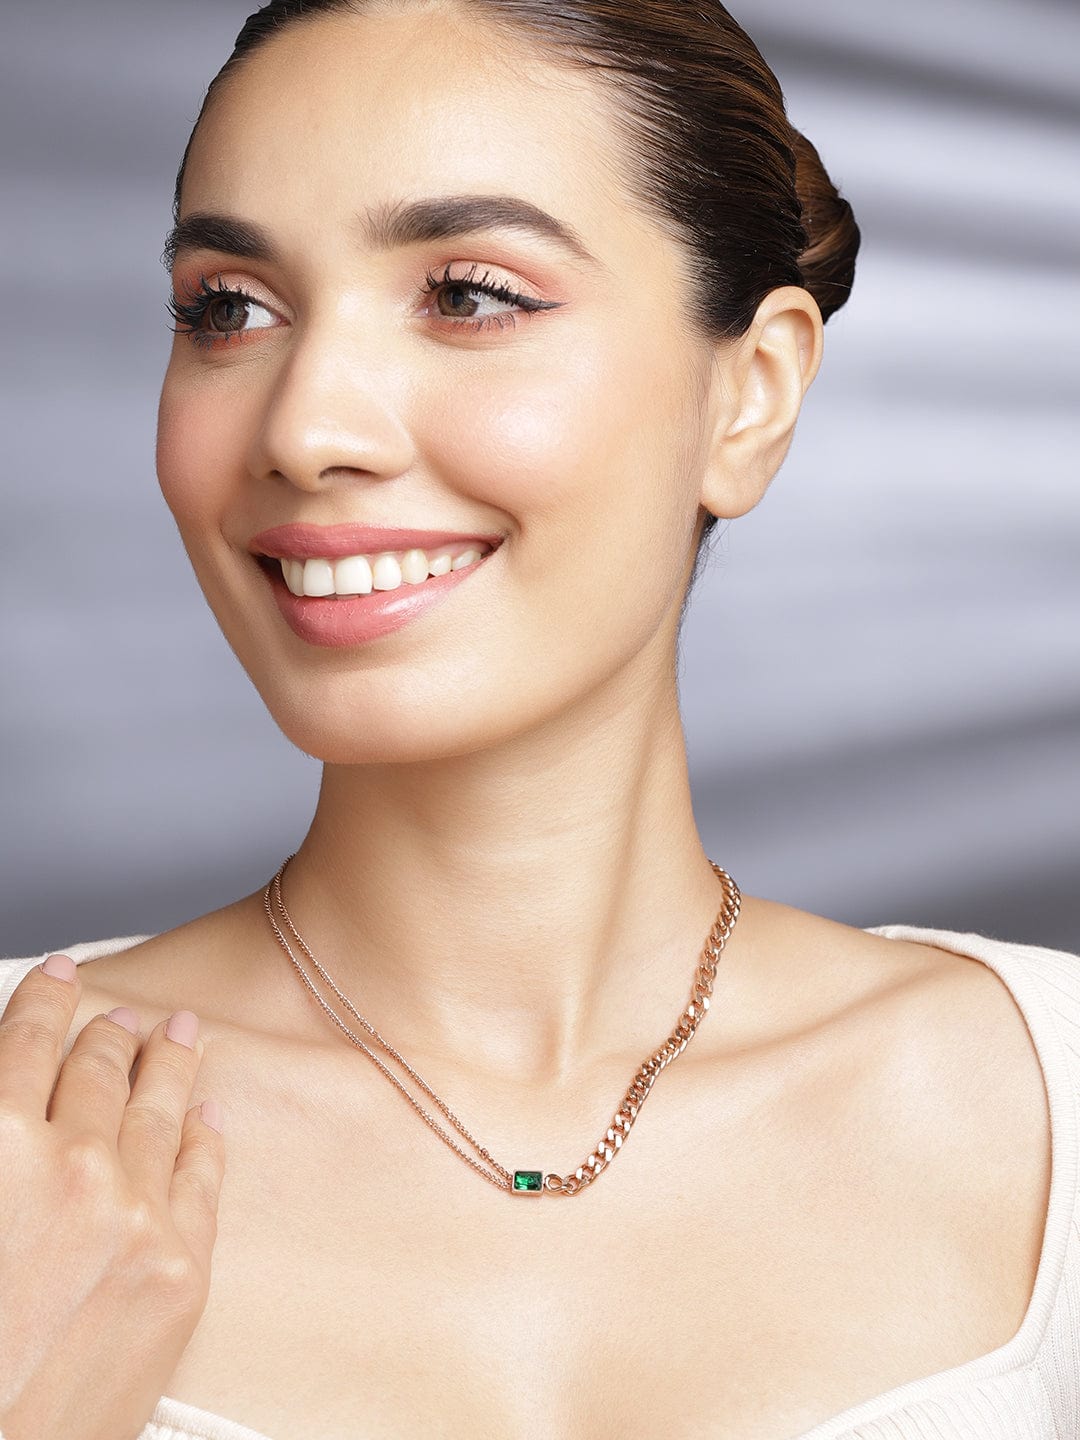 Rubans Voguish Rose Gold Plated Emerald Studded Dual Chained Necklace Necklace and Chains